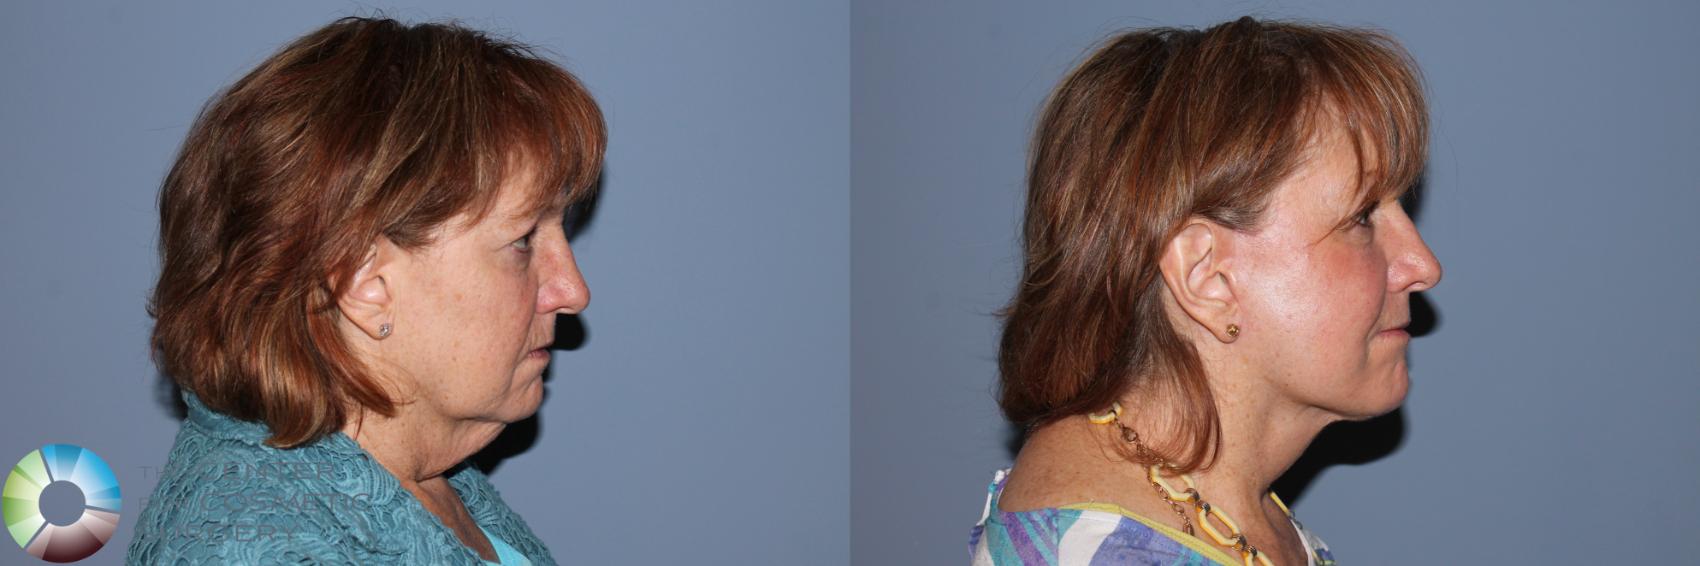 Before & After Mini Facelift Case 11526 Right Side View in Golden, CO